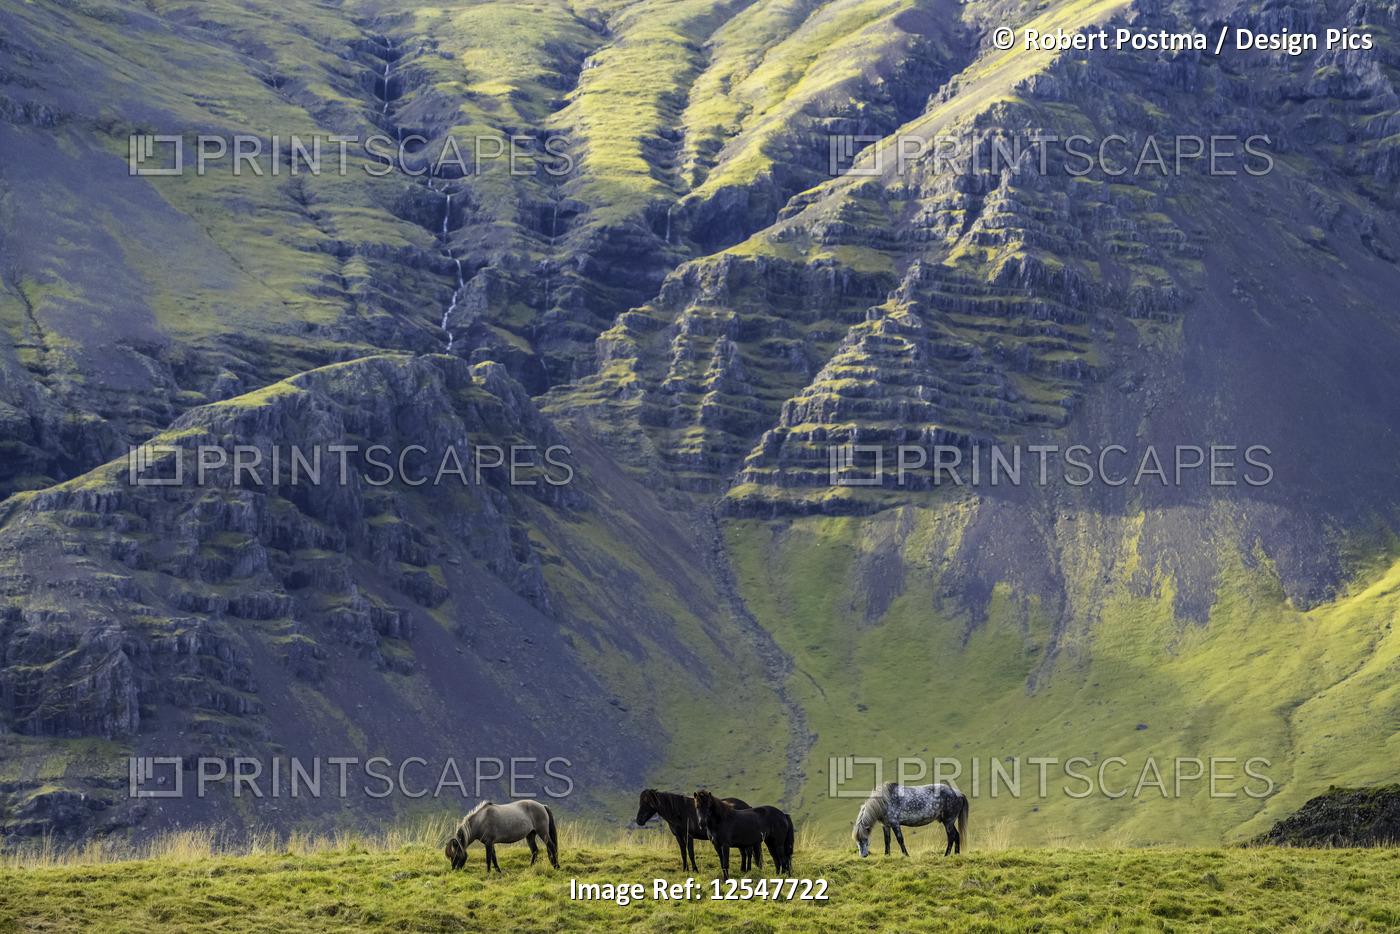 Icelandic horses in the natural landscape; Iceland